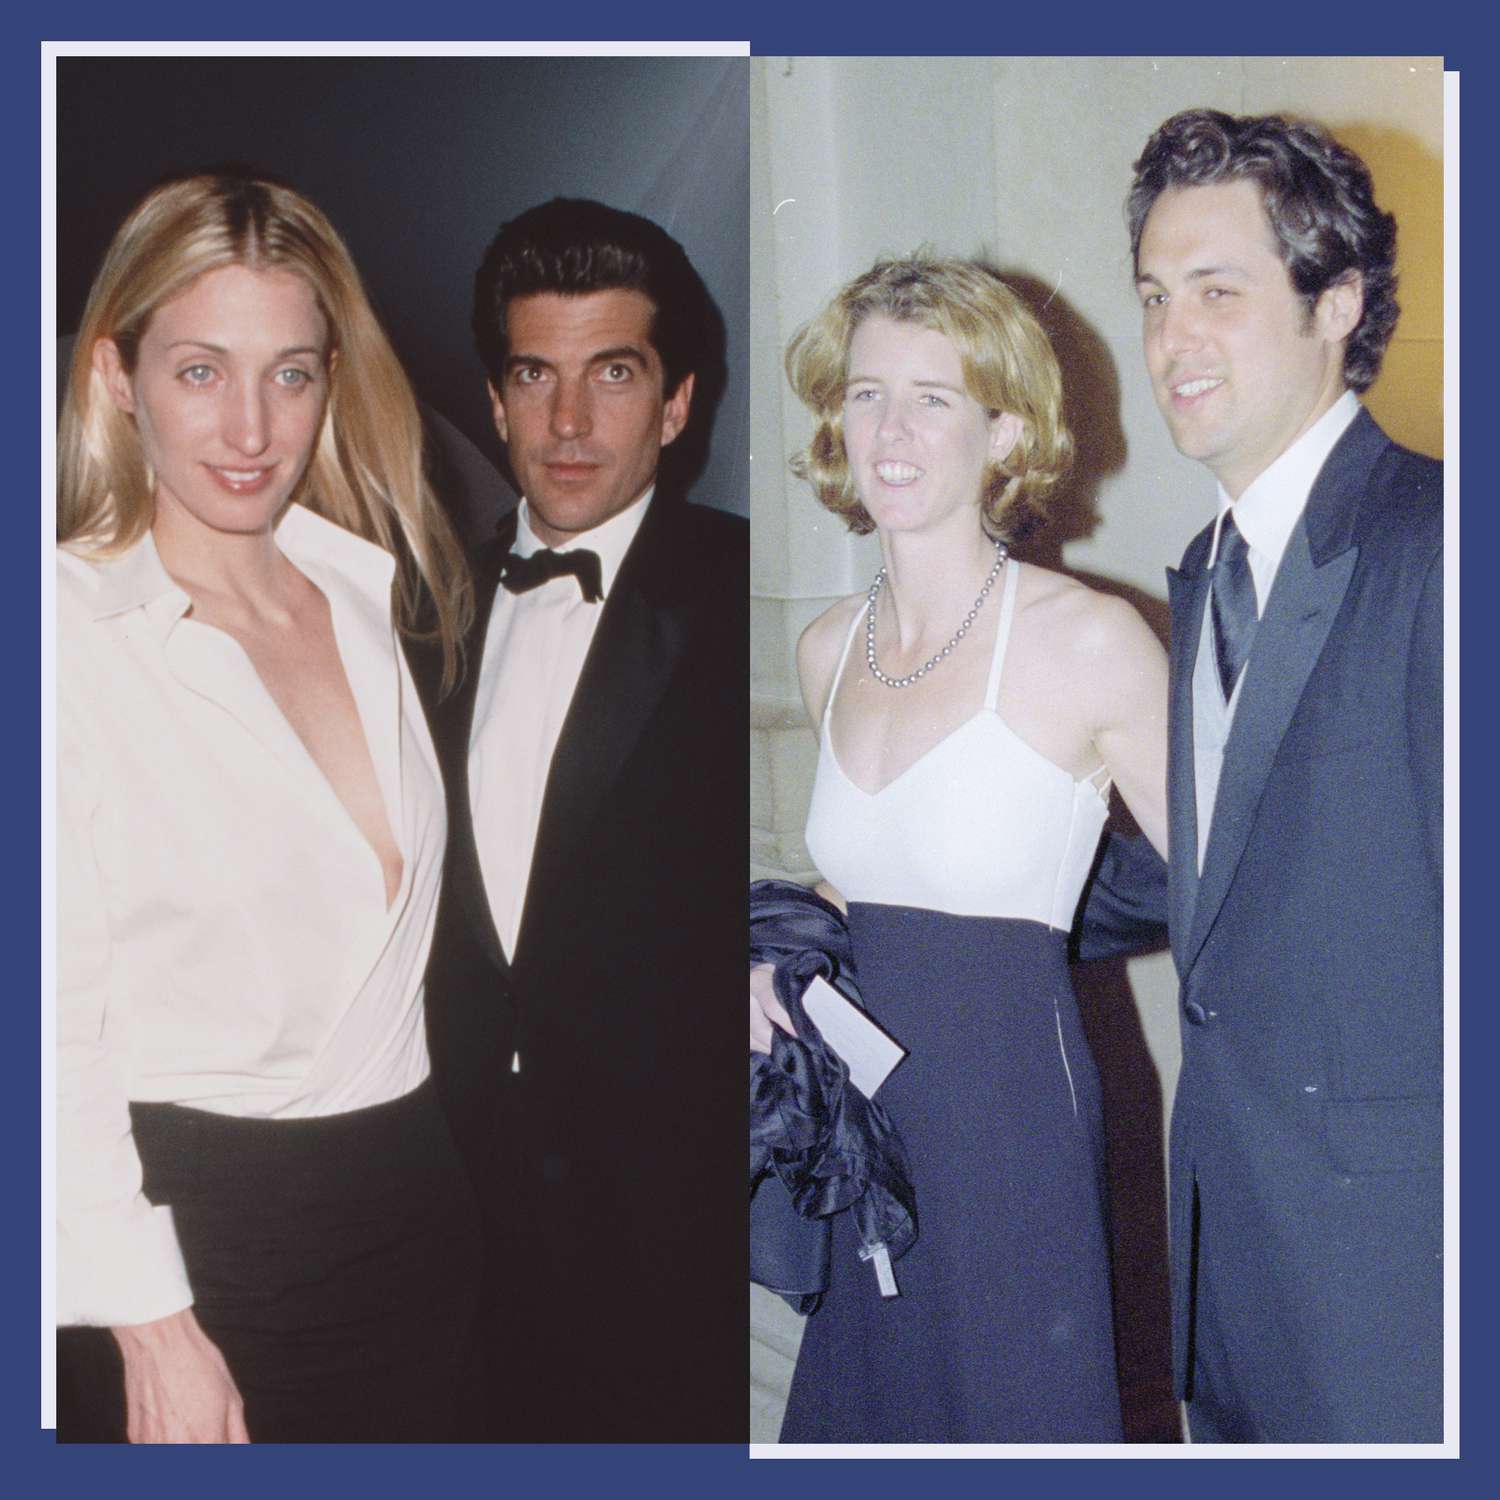 Rory Kennedy Postponed Her Wedding After the Deaths of JFK Jr. and Carolyn Bessette-Kennedy—Here's What We Know About...